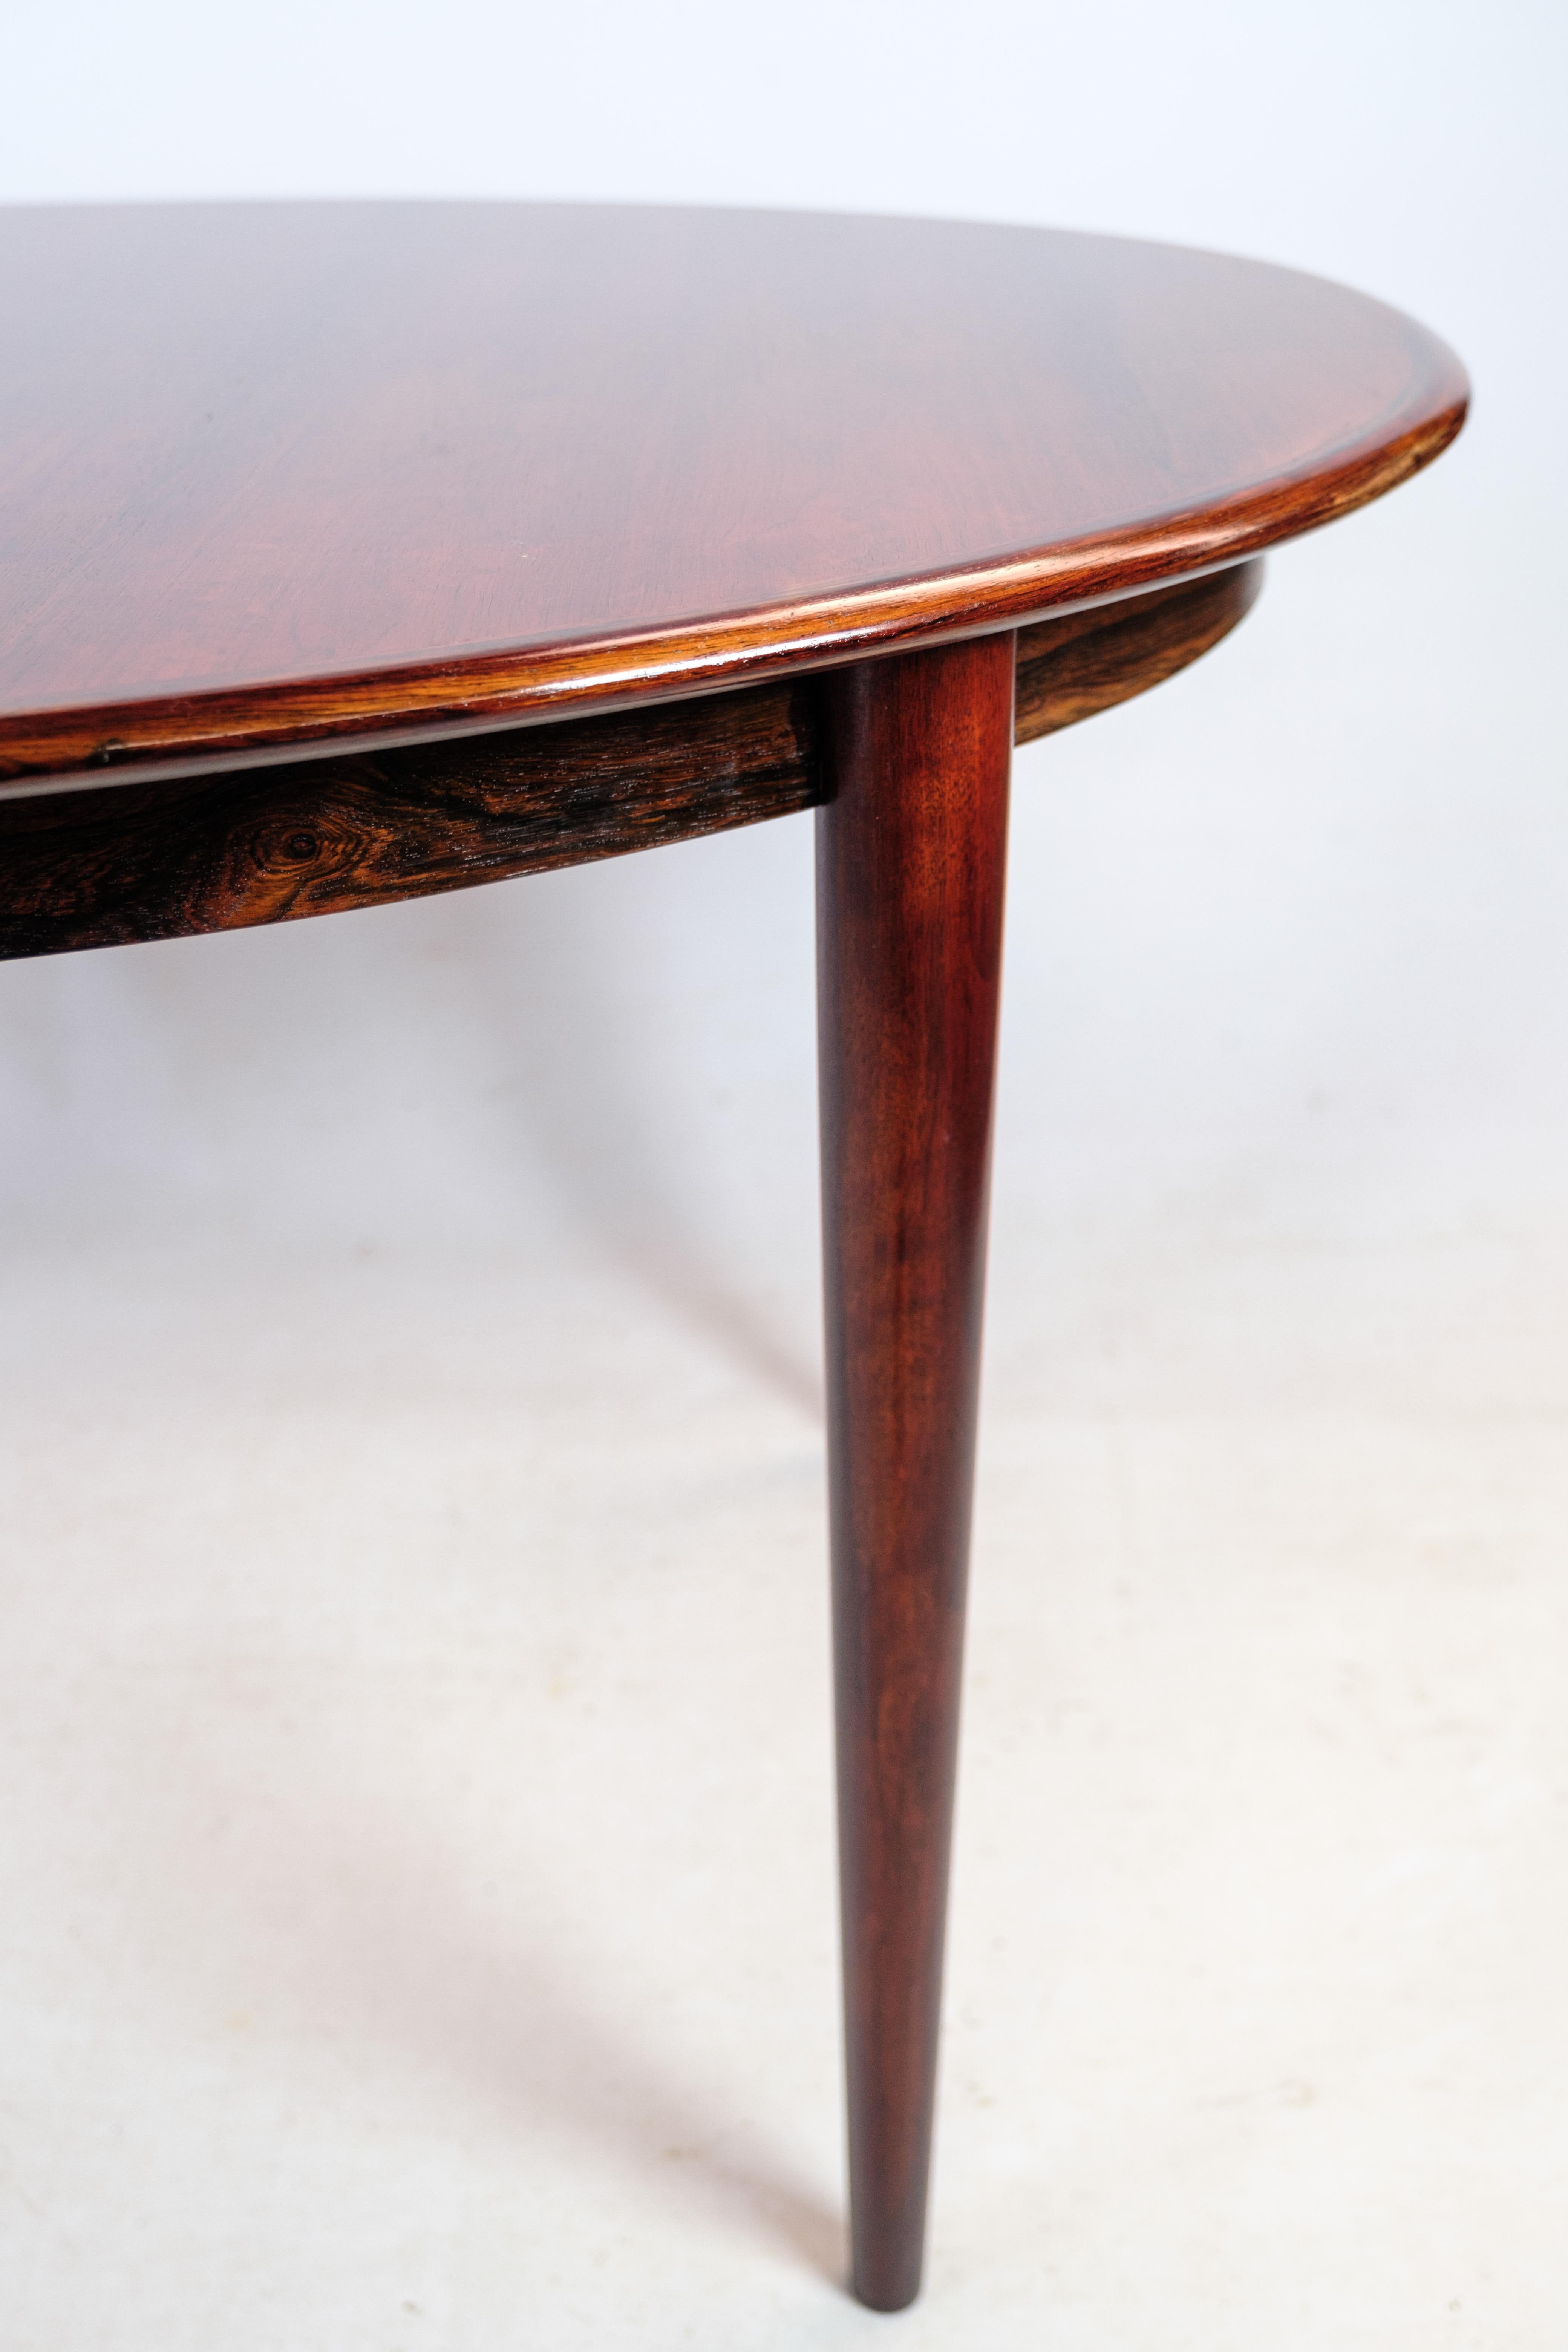 Dining Table Made In Rosewood By Arne Vodder From 1960s In Good Condition For Sale In Lejre, DK